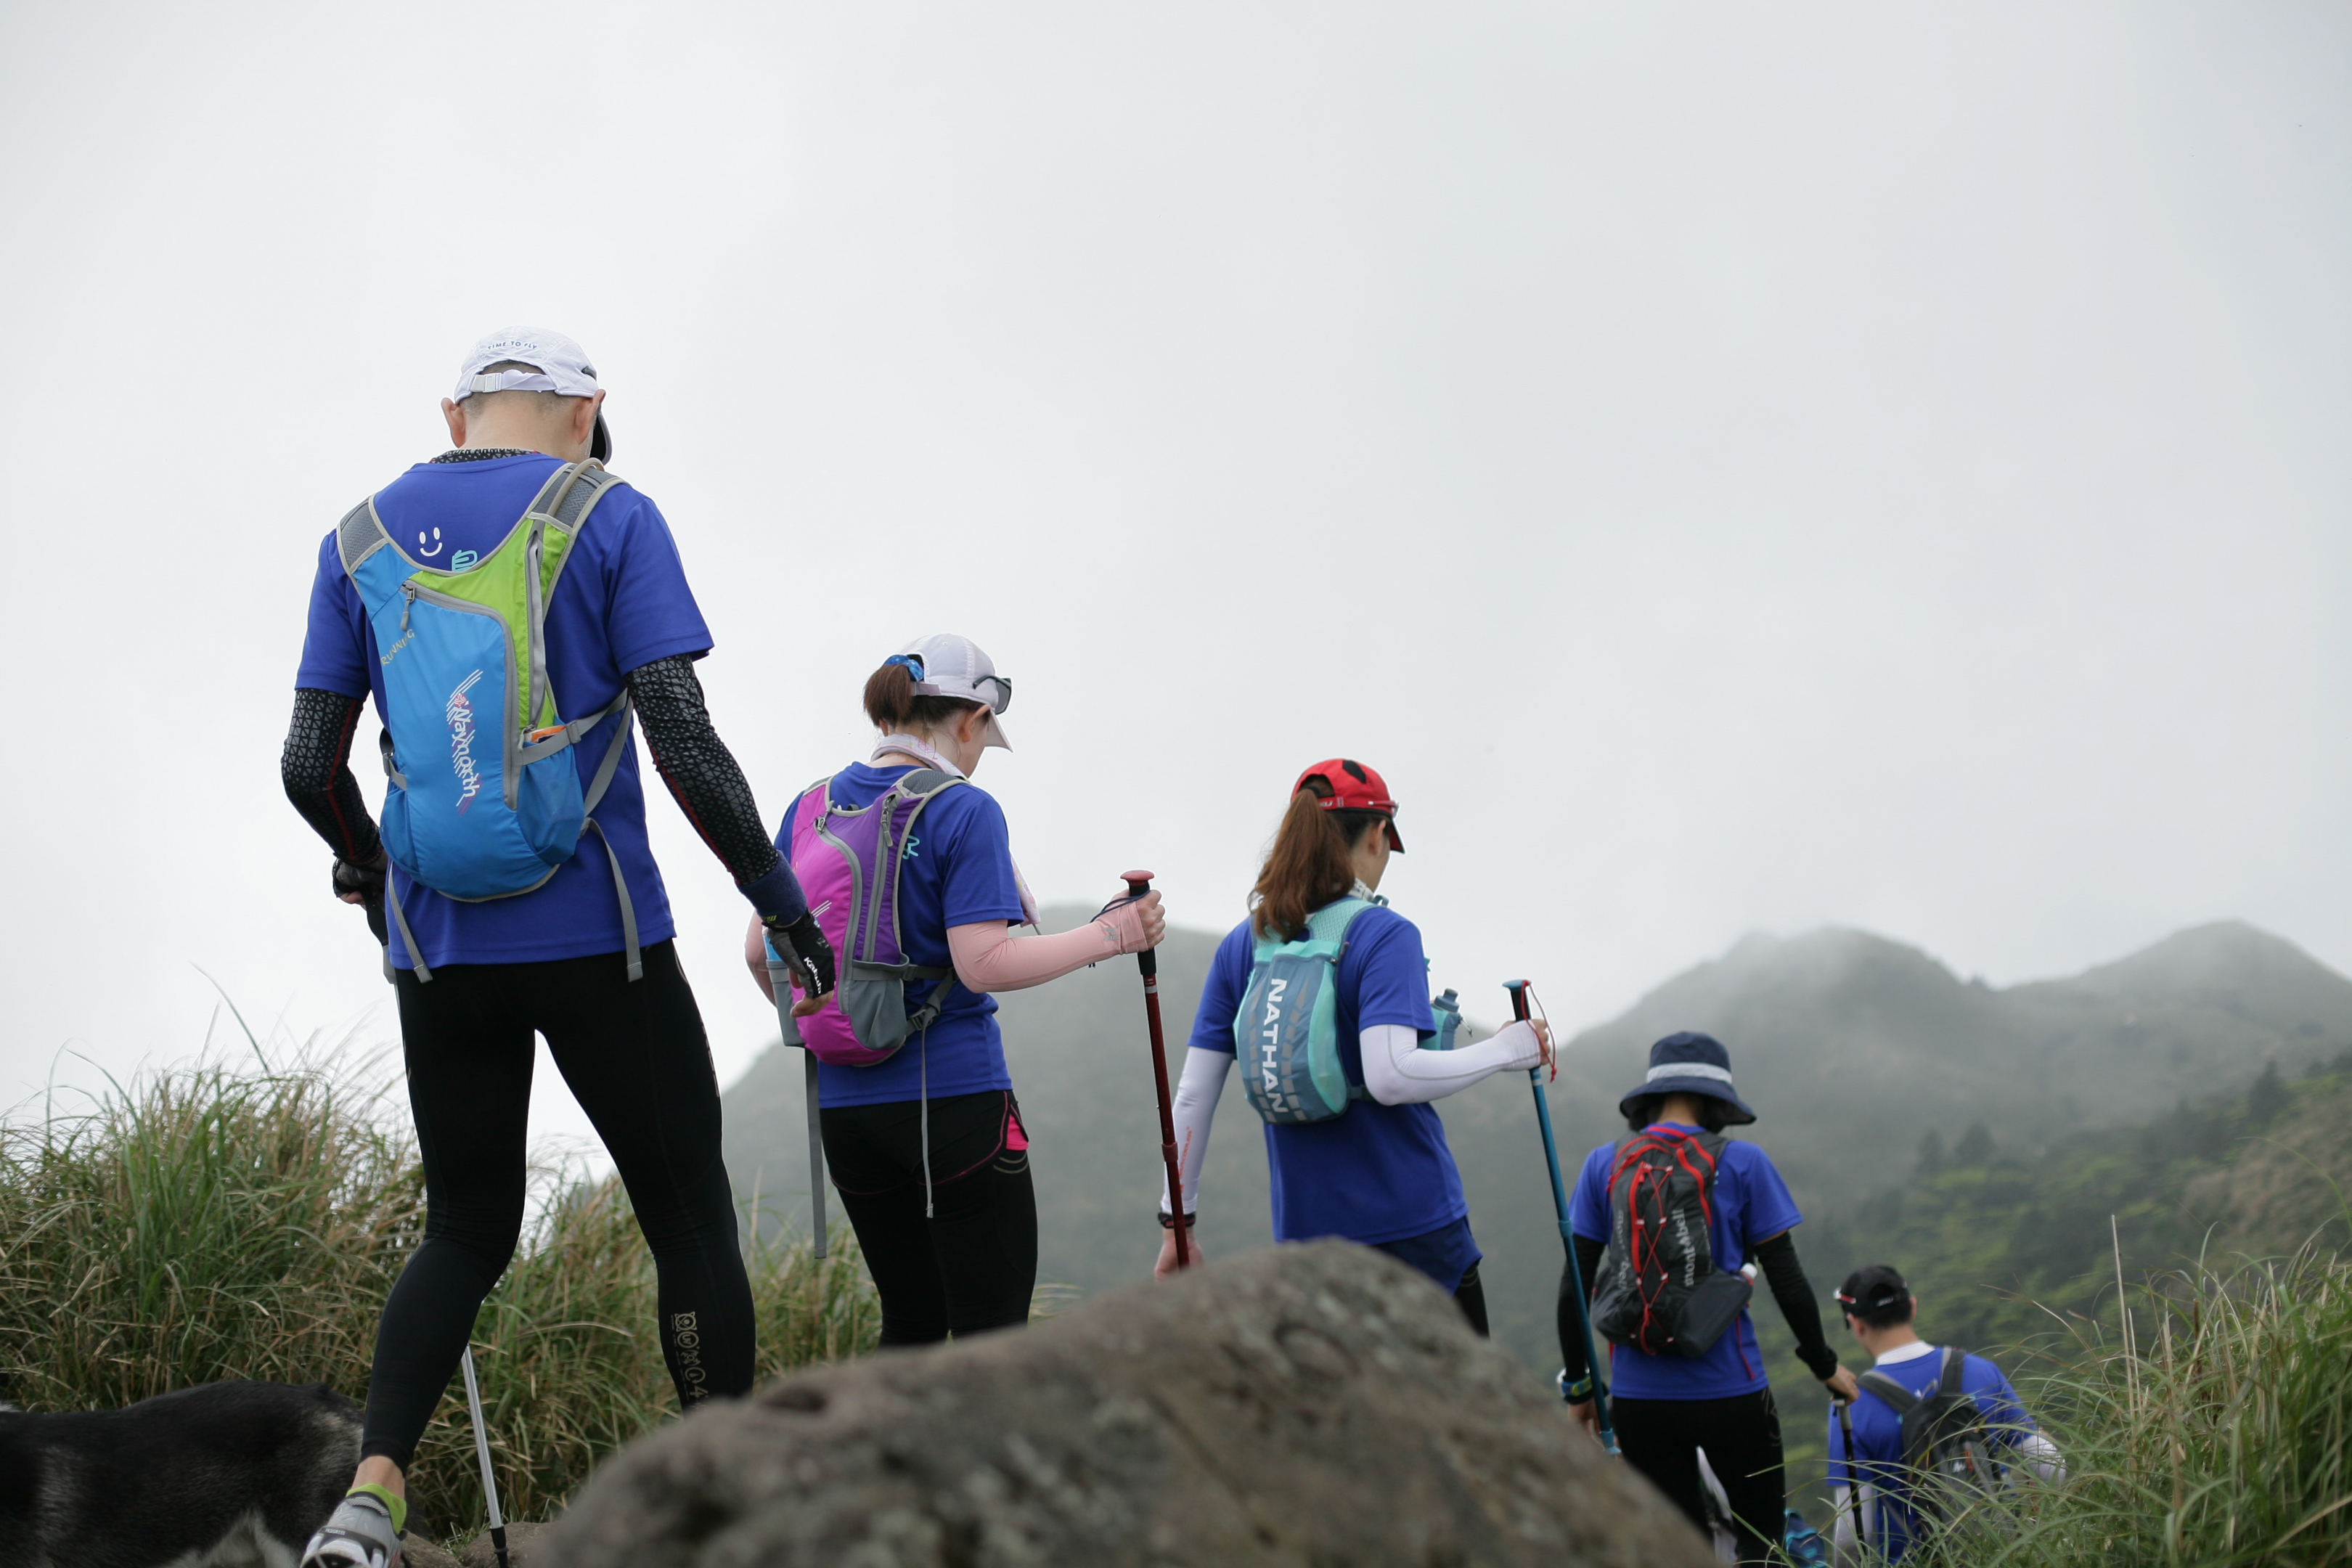 A group of hikers using walking poles. Photo by MChe Lee on Unsplash